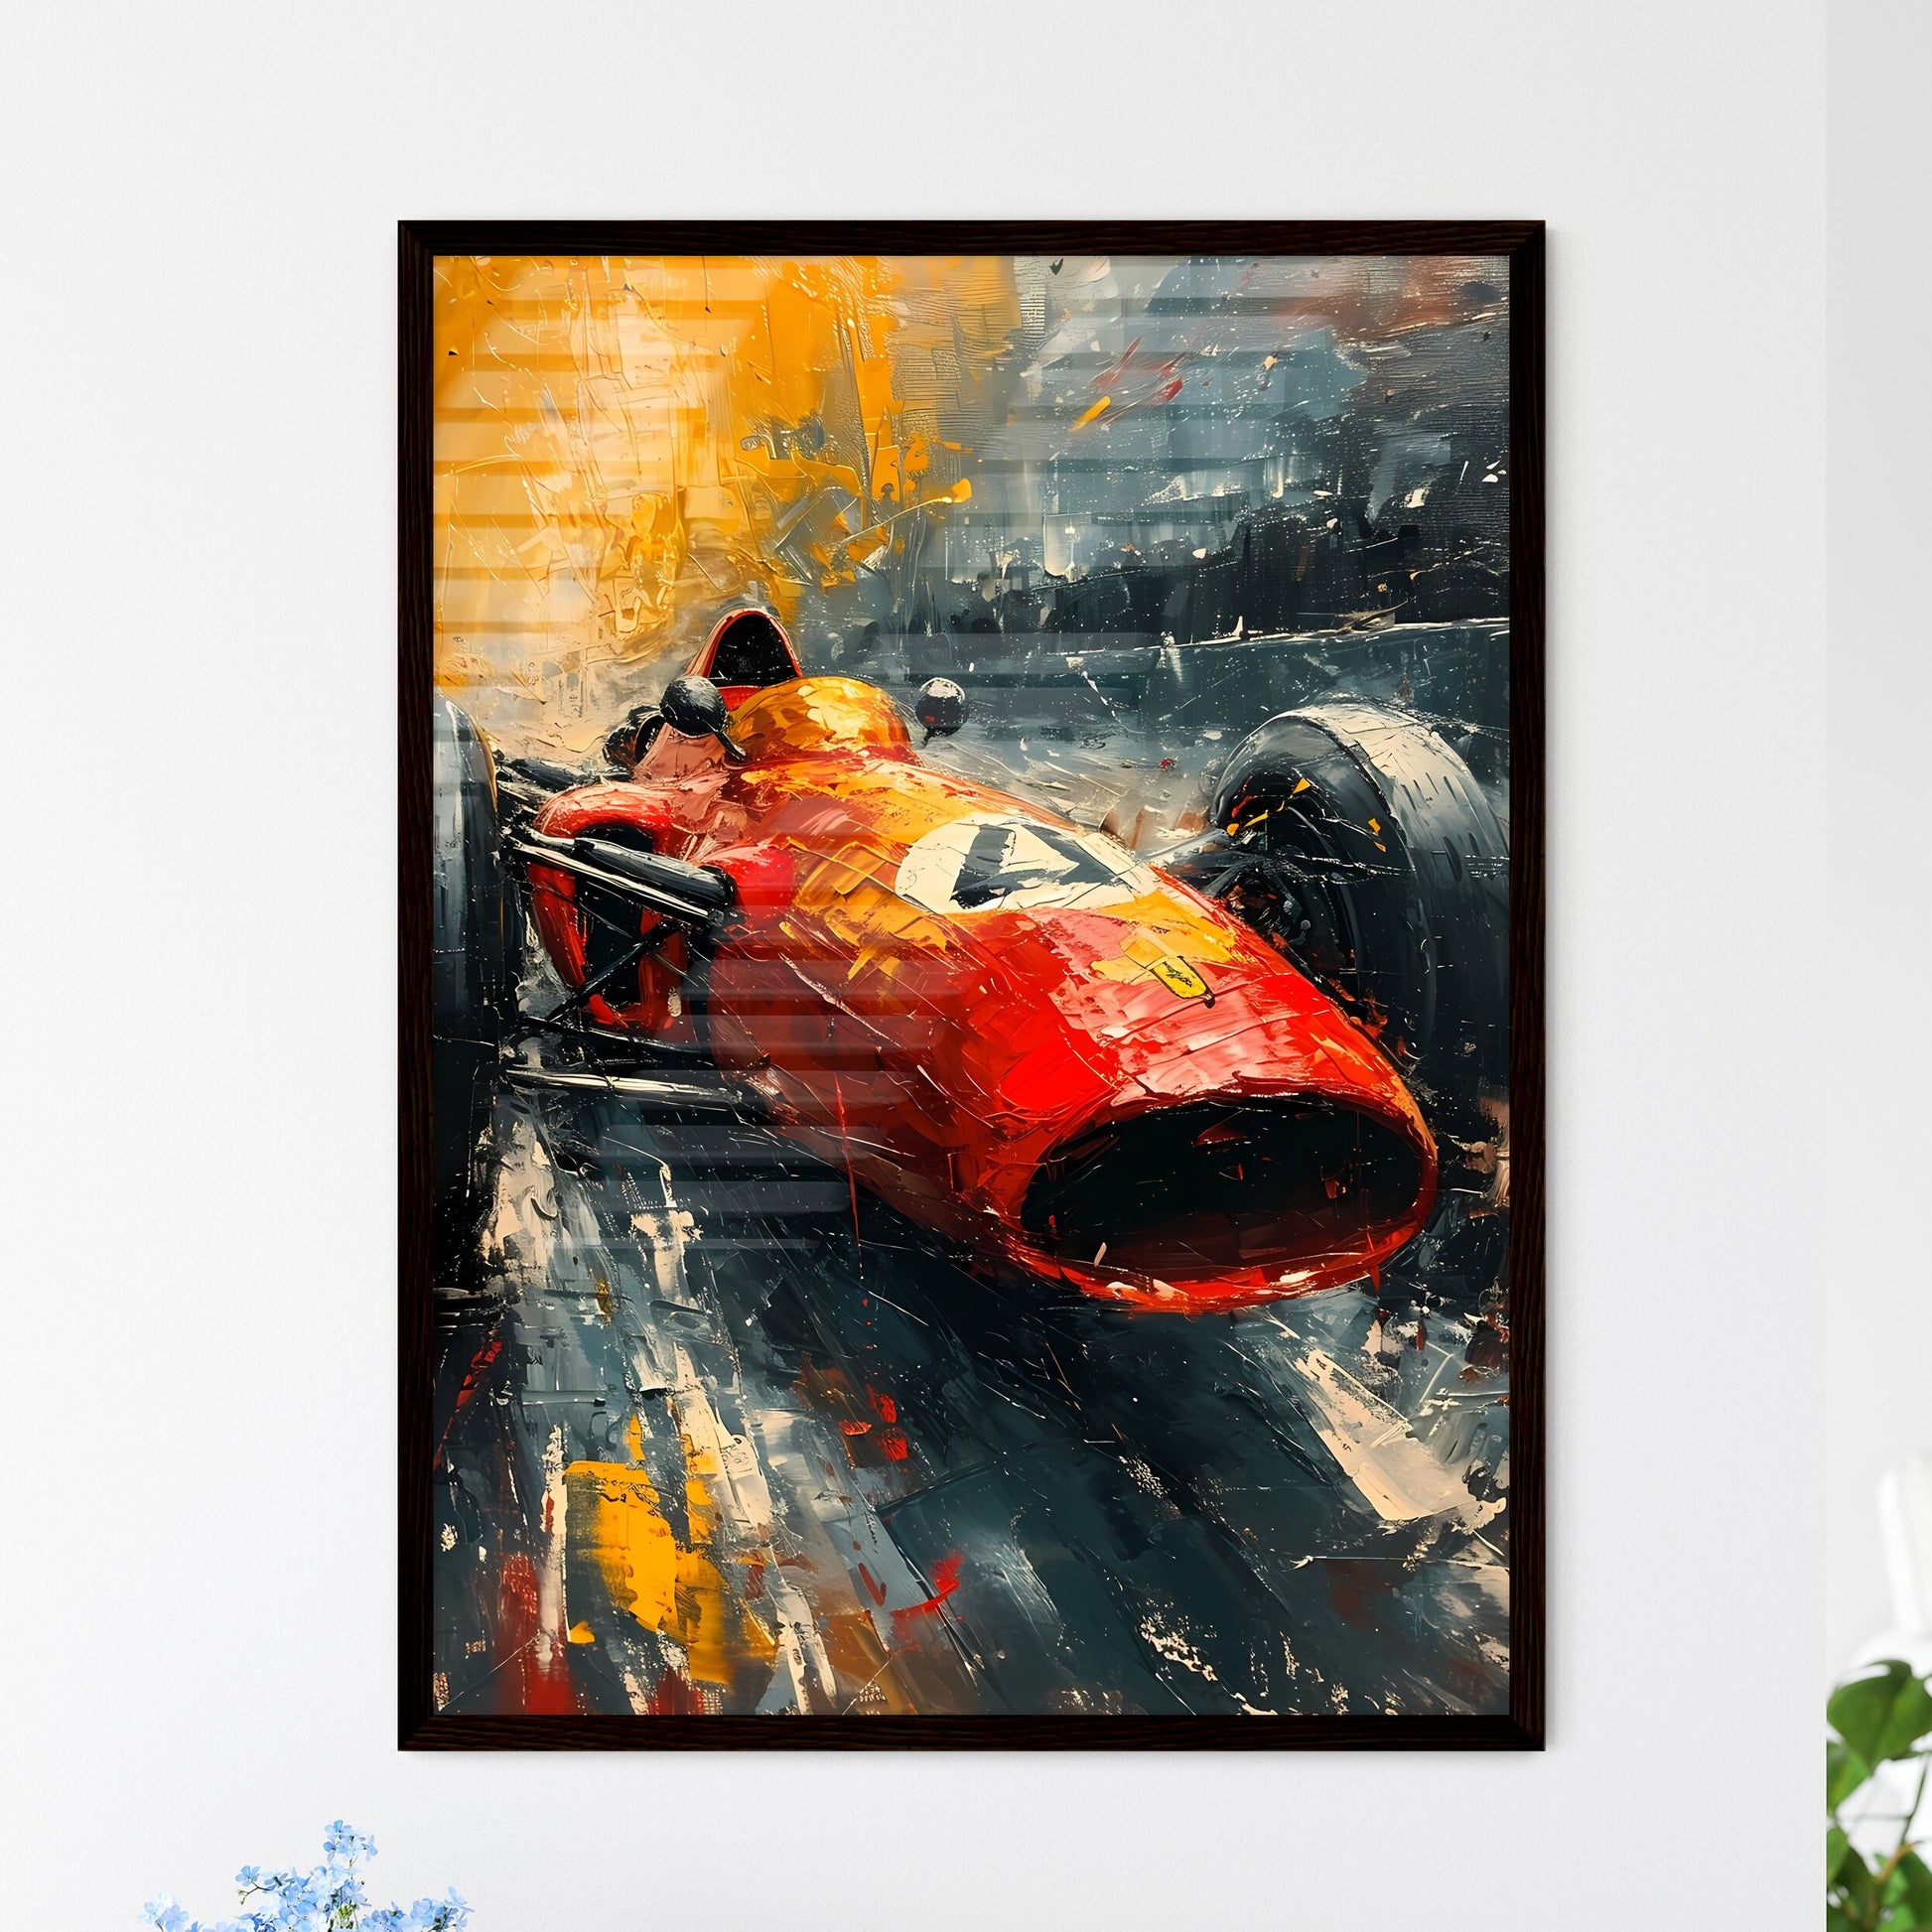 A Poster of Formula One style race car - A Painting Of A Red Race Car Default Title